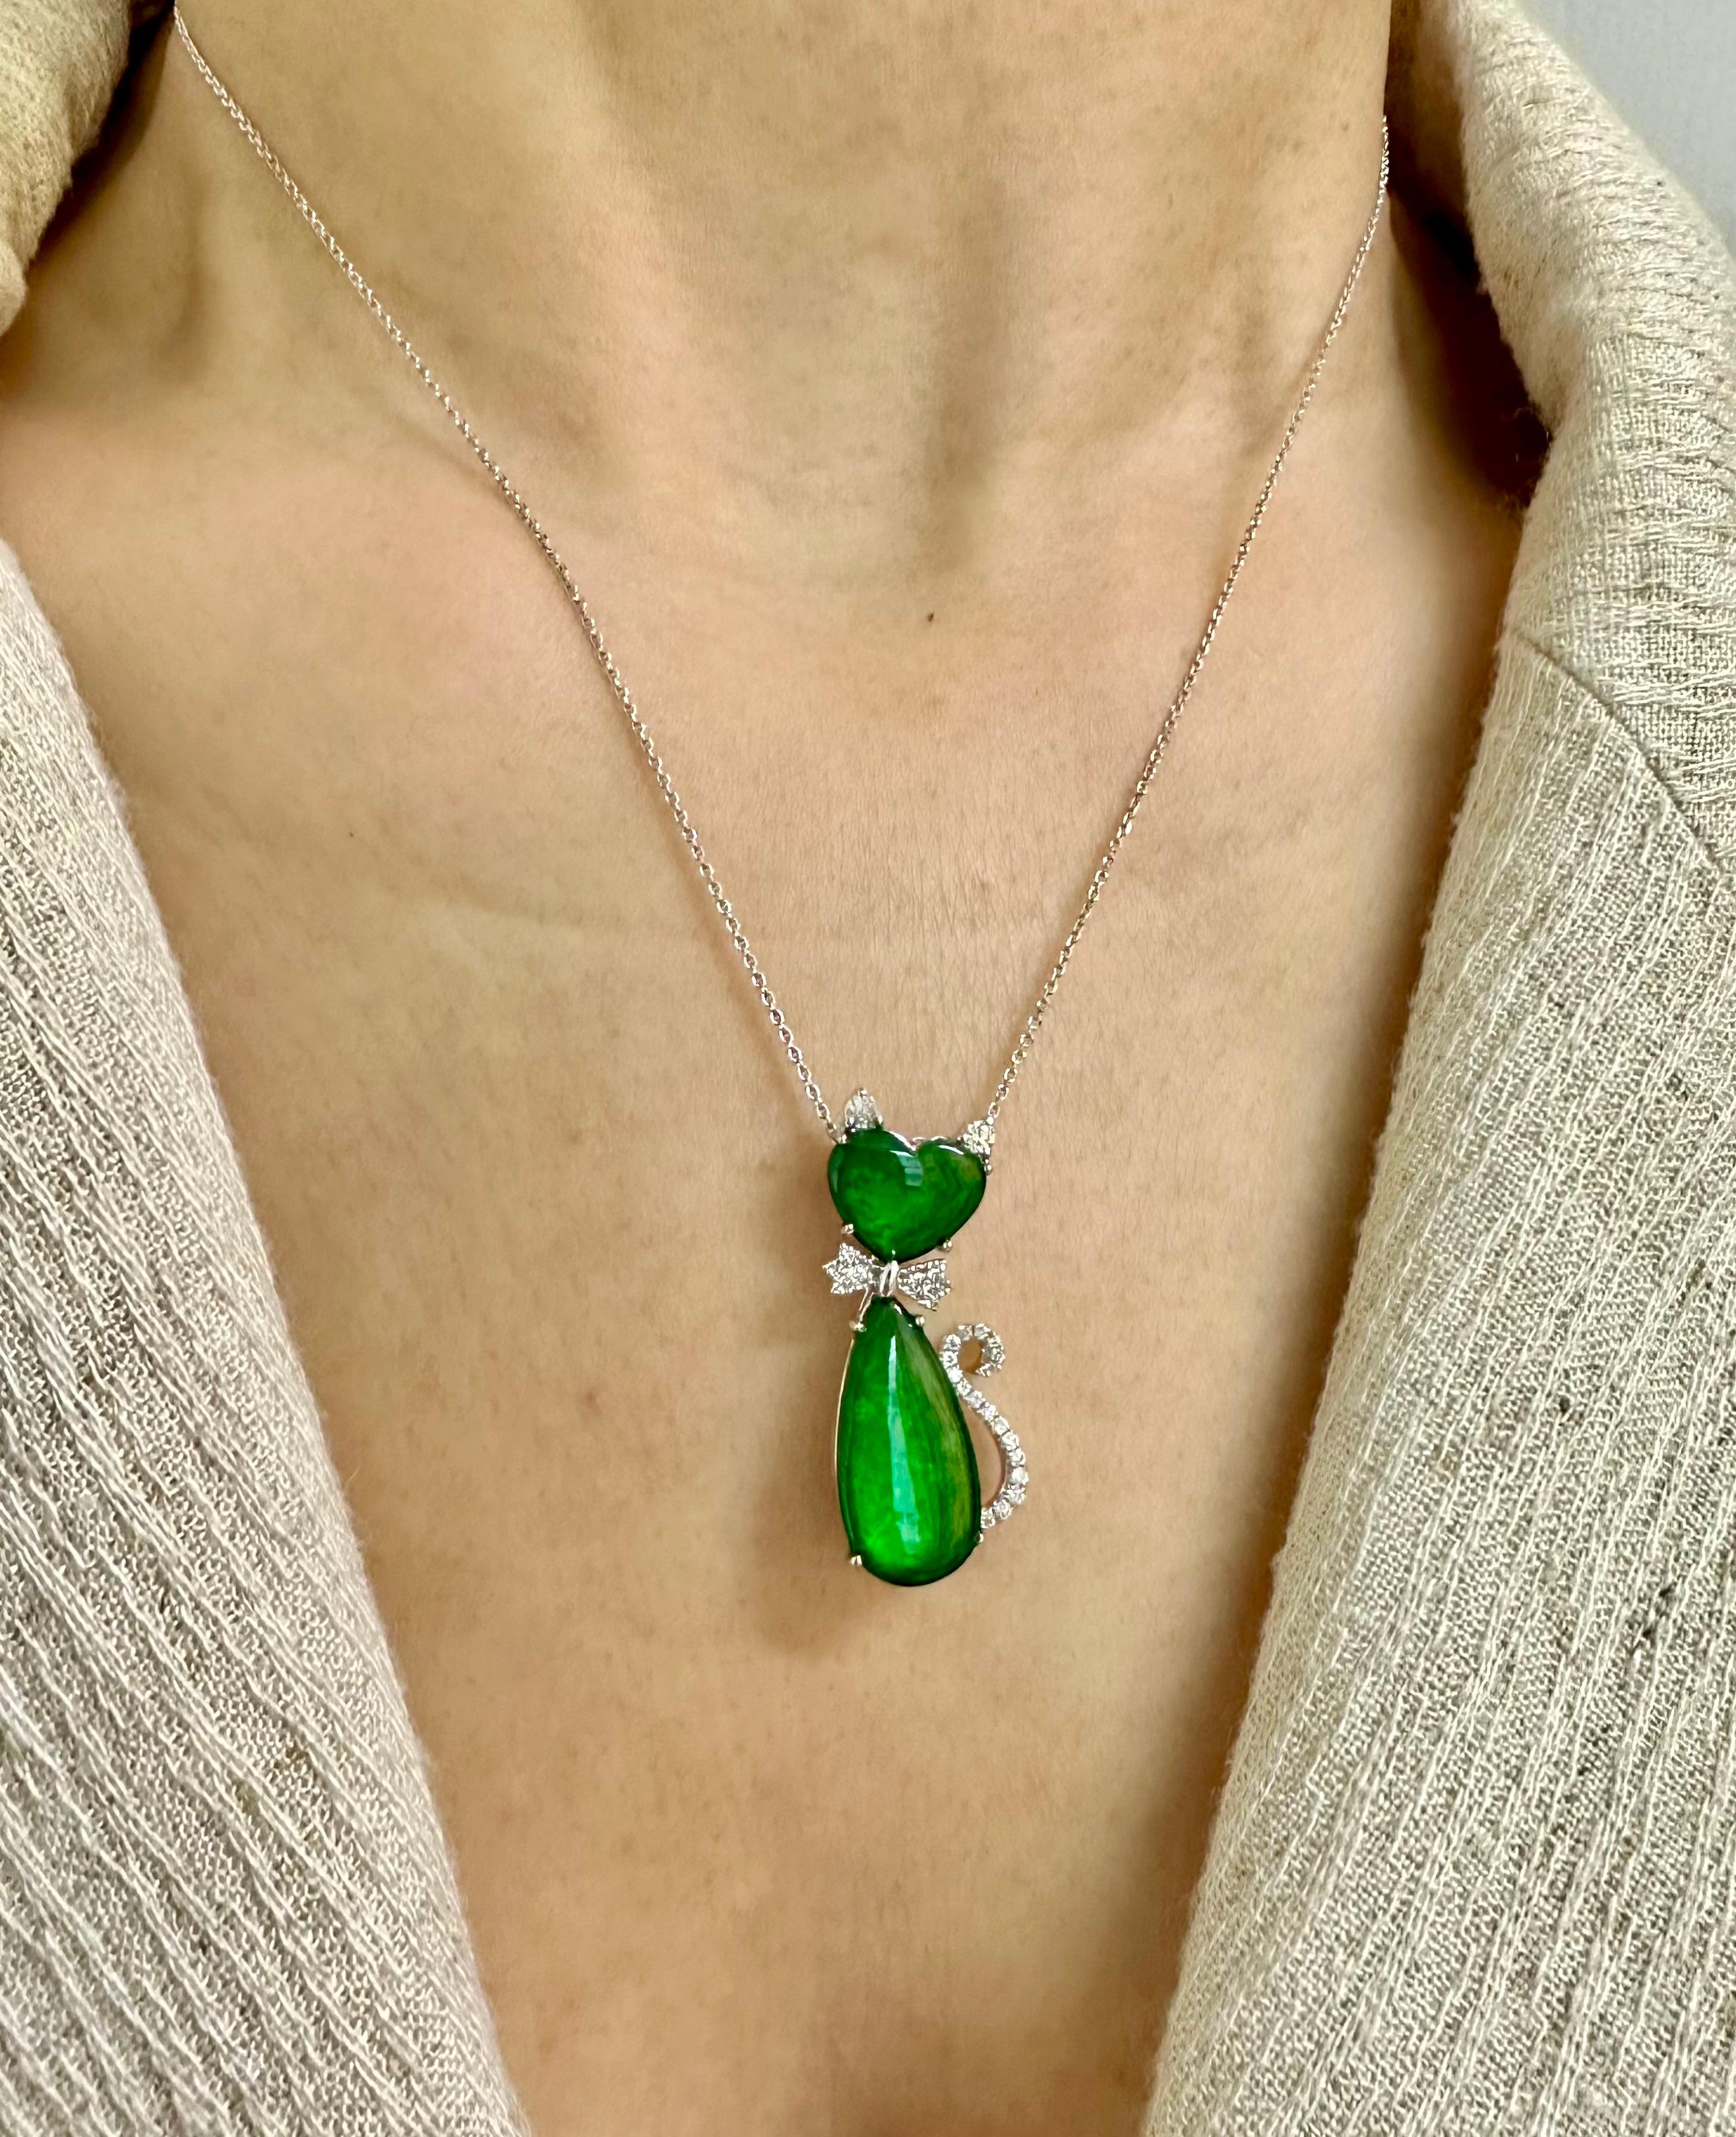 Please check out the HD video. This jade cat has a beautiful balance of color saturation and transparency! Here is a natural intense apple green Jade and diamond pendant. It is certified. The pendant is set in 18k white gold and diamonds. There are